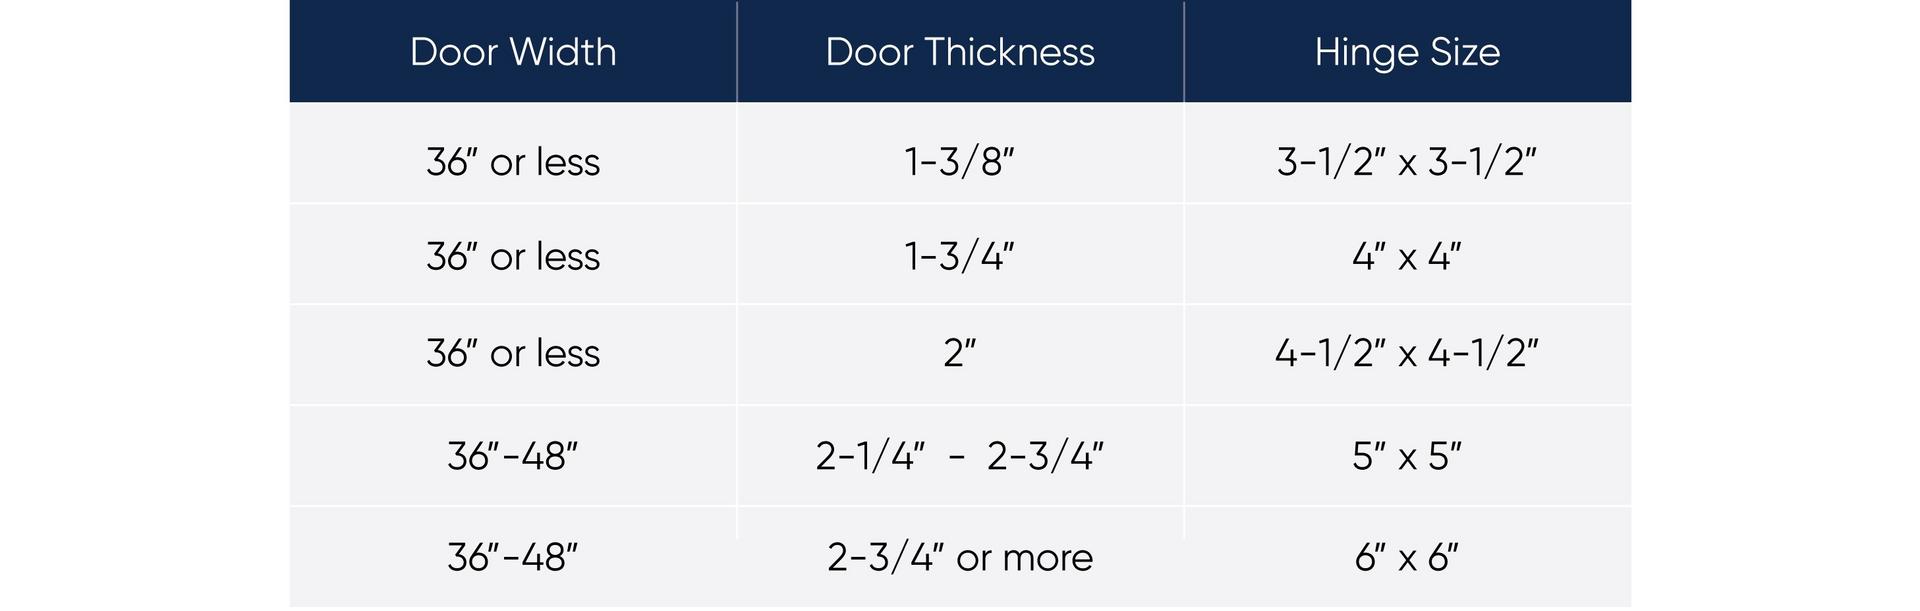 Table detailing what hinge size should be used based on door width and thickness